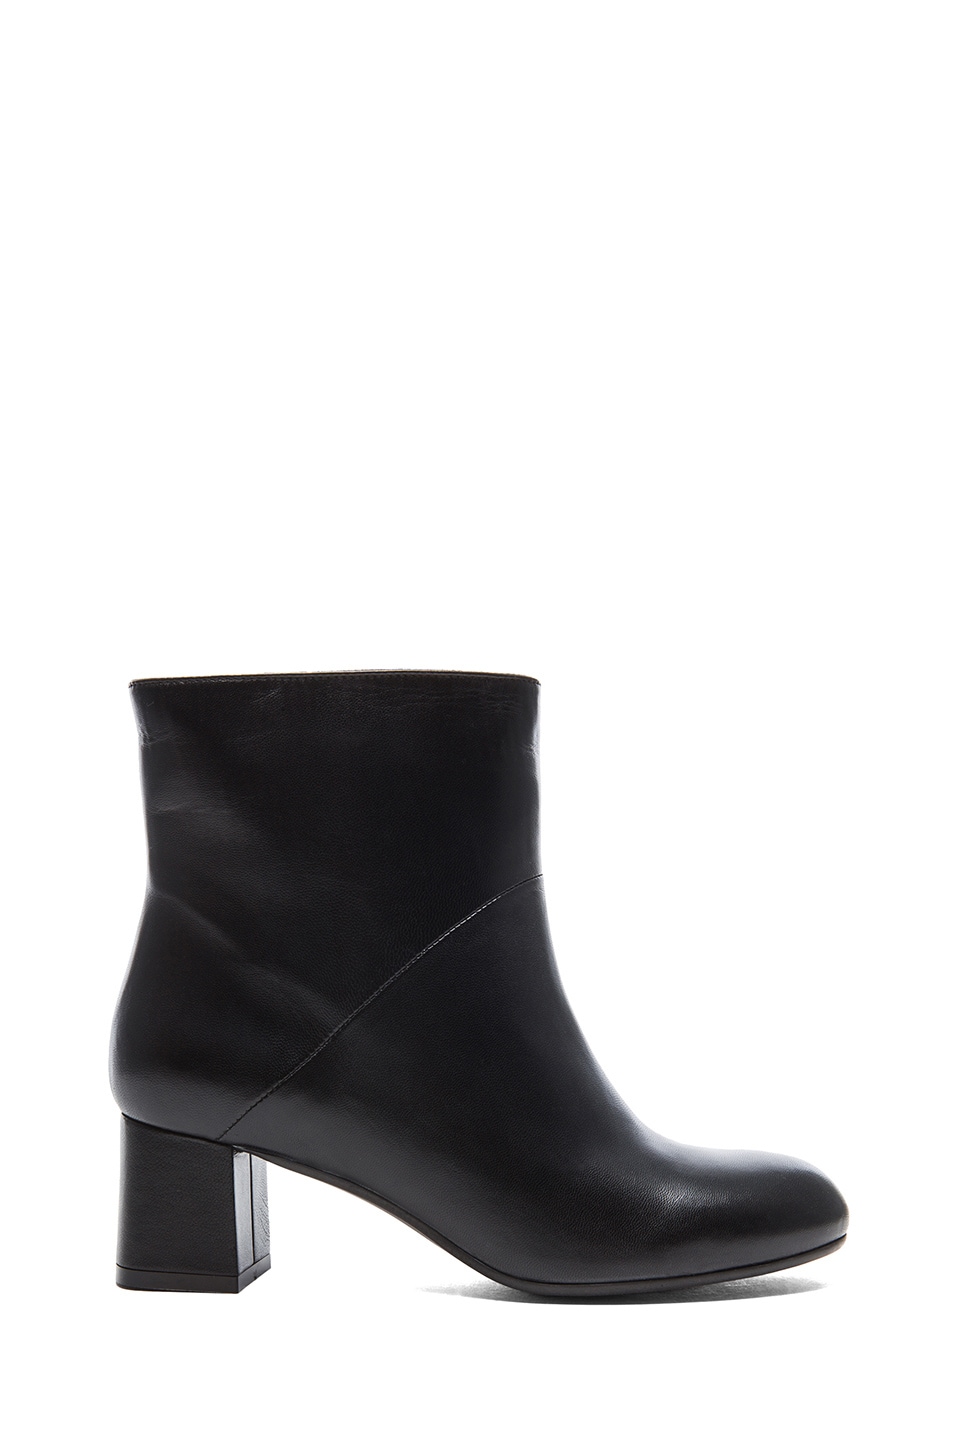 Image 1 of Marni Nappa Leather Ankle Booties in Coal